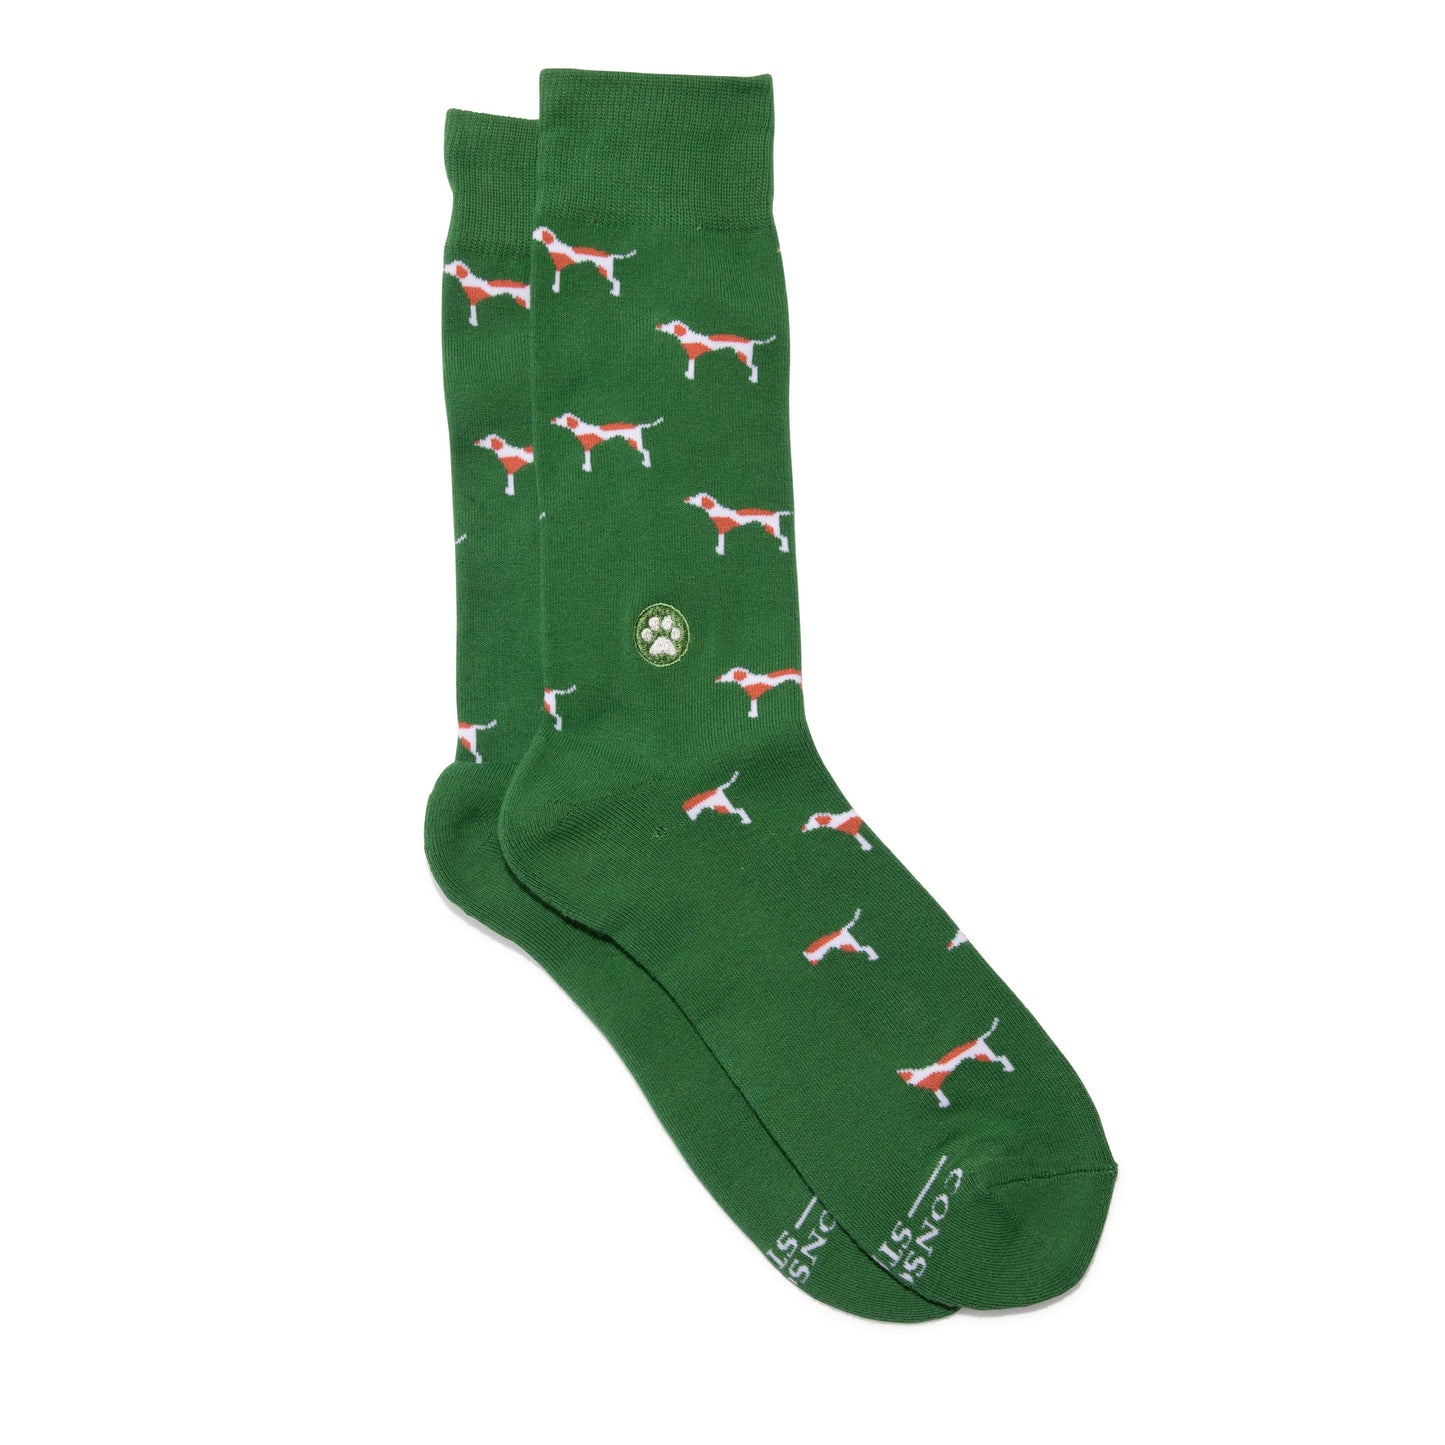 Socks that Save Dogs (Green Dogs)  Conscious Step Medium  -better made easy-eco-friendly-sustainable-gifting